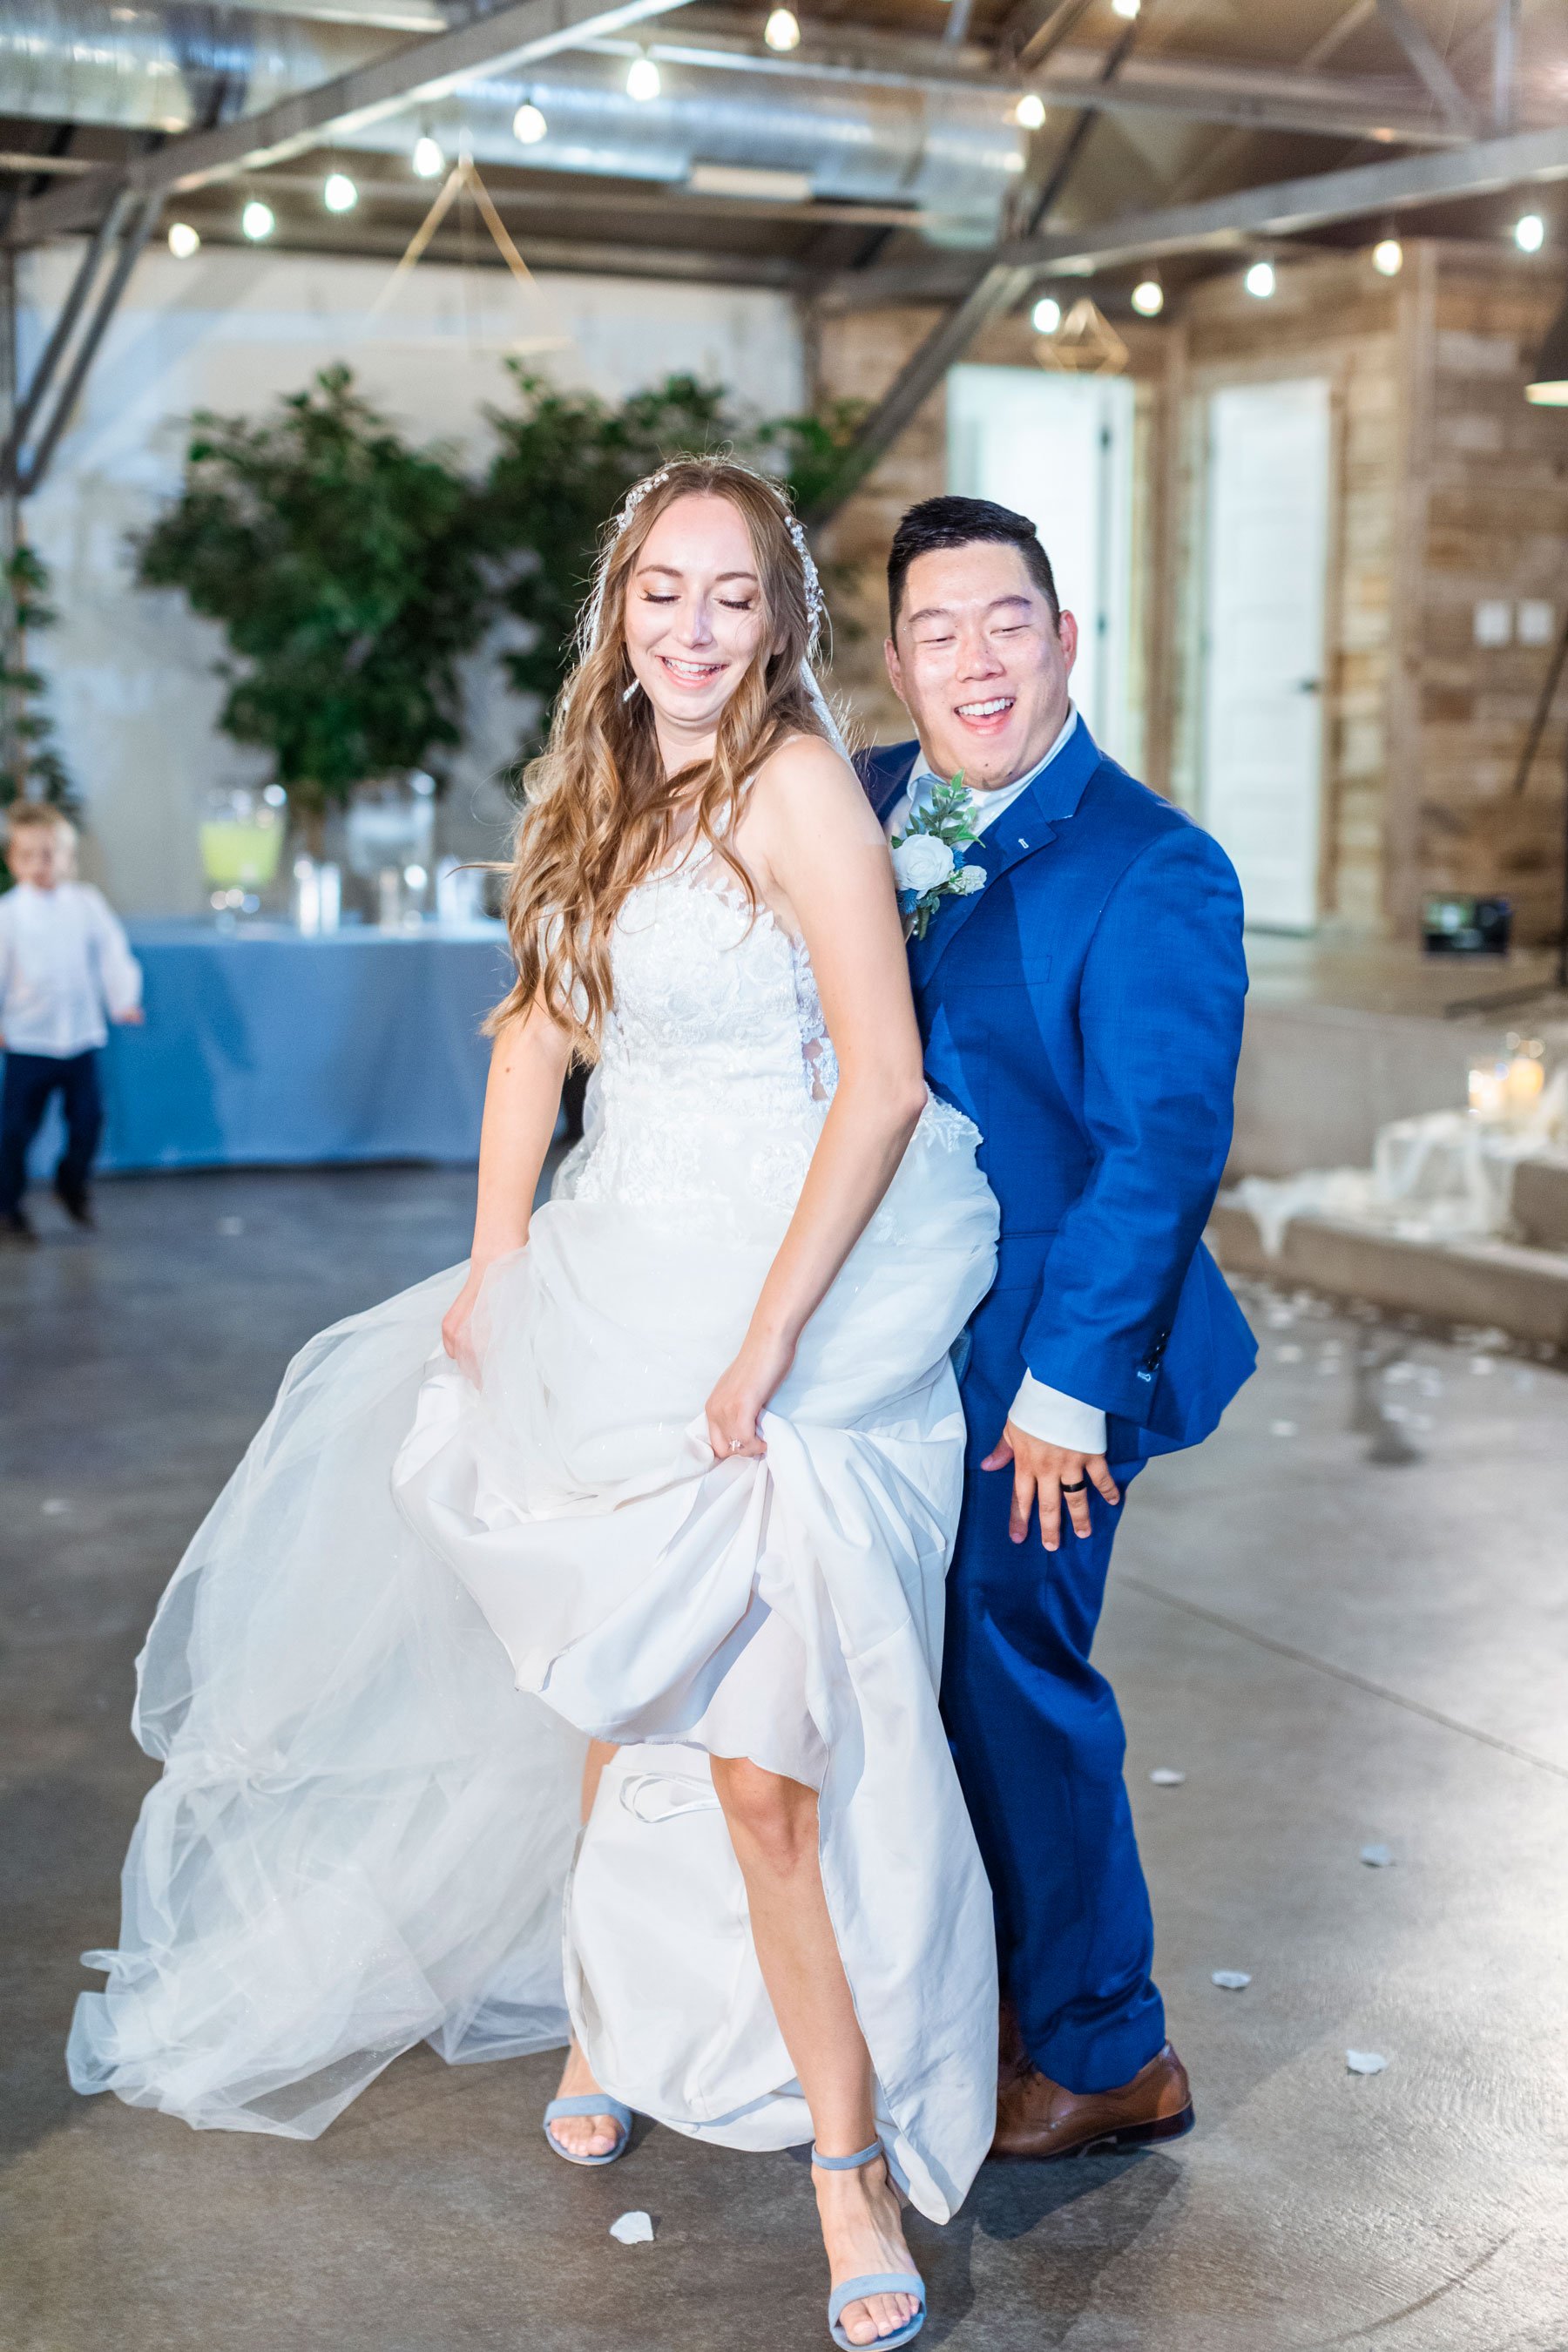  Groom and bride grind during their first dance as a married couple making it a good time captured by Savanna Richardson Photography in Orem. fun newly married dancing picture bride and groom get down dance fun first dance #savannarichardsonphotograp